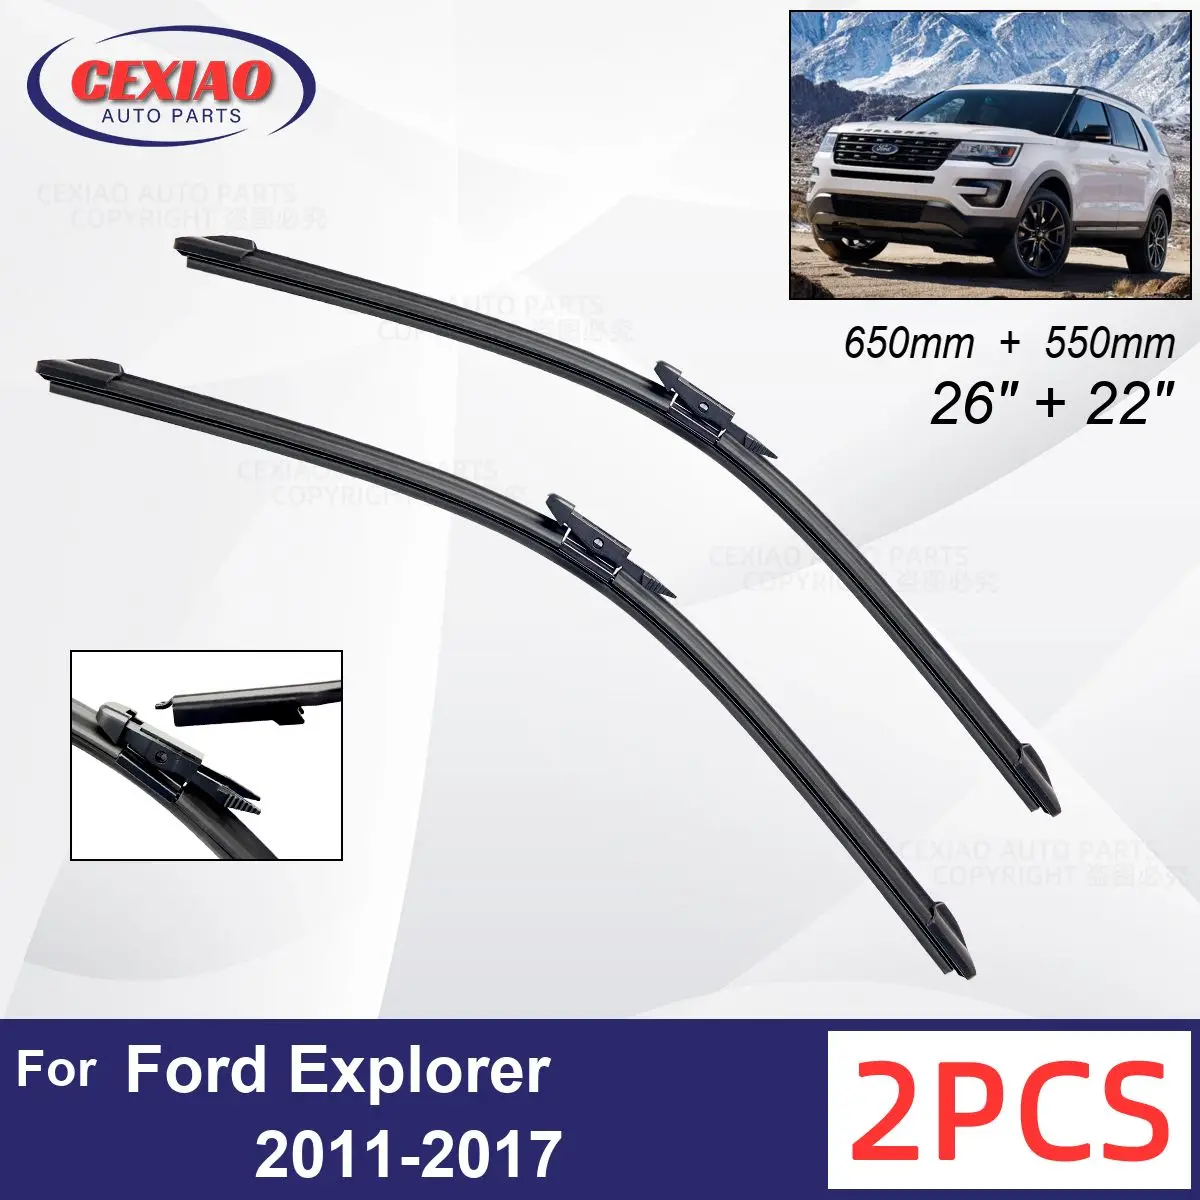 

Car Wiper For Ford Explorer 2011-2017 Front Wiper Blades Soft Rubber Windscreen Wipers Auto Windshield 26" 22" 650mm 550mm